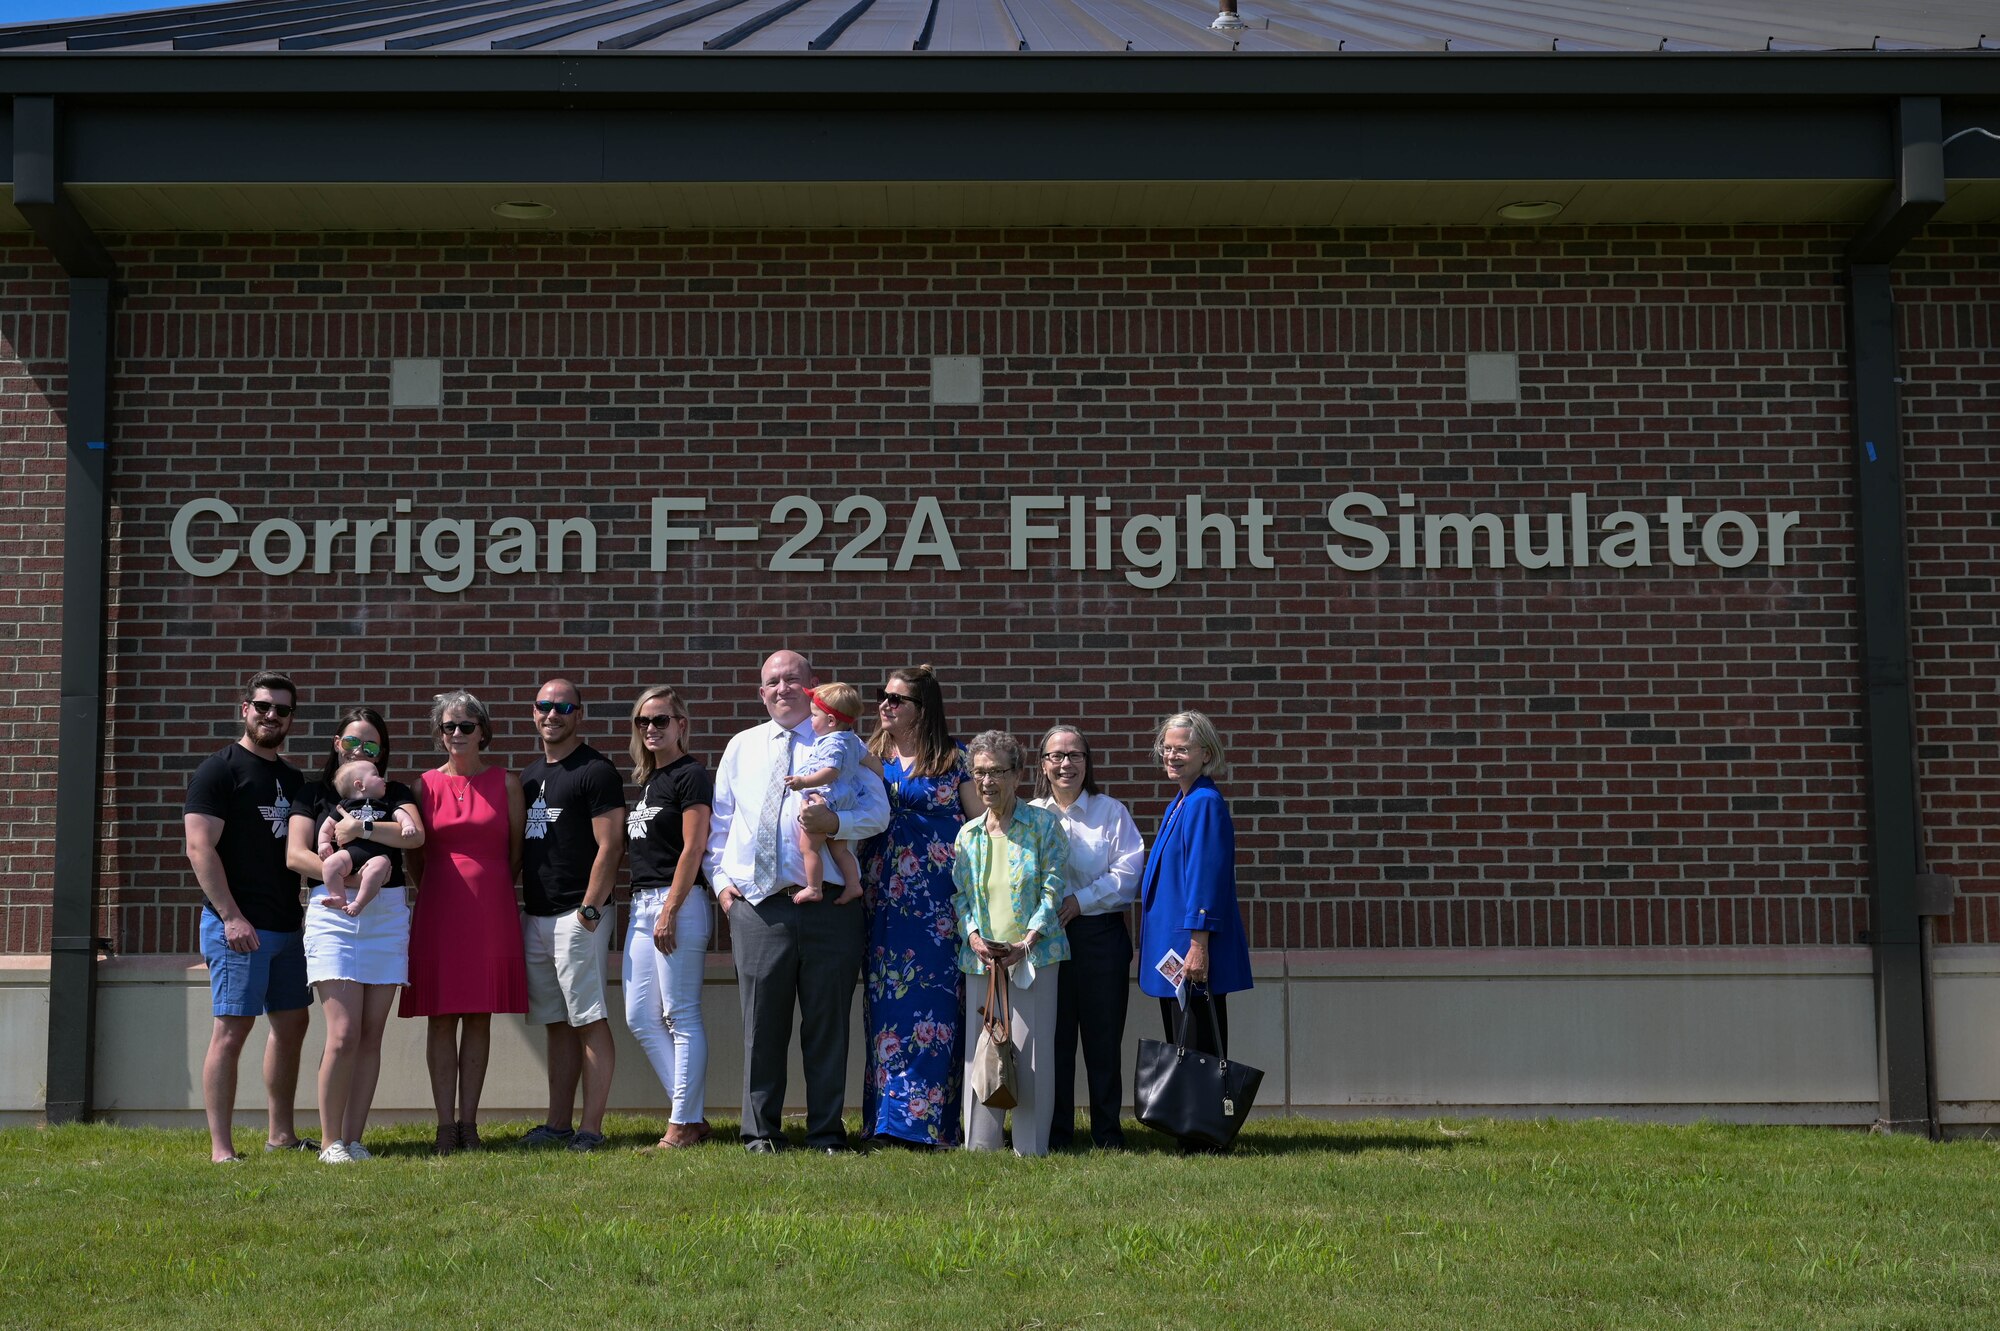 Family members pose in front of a flight simulator.